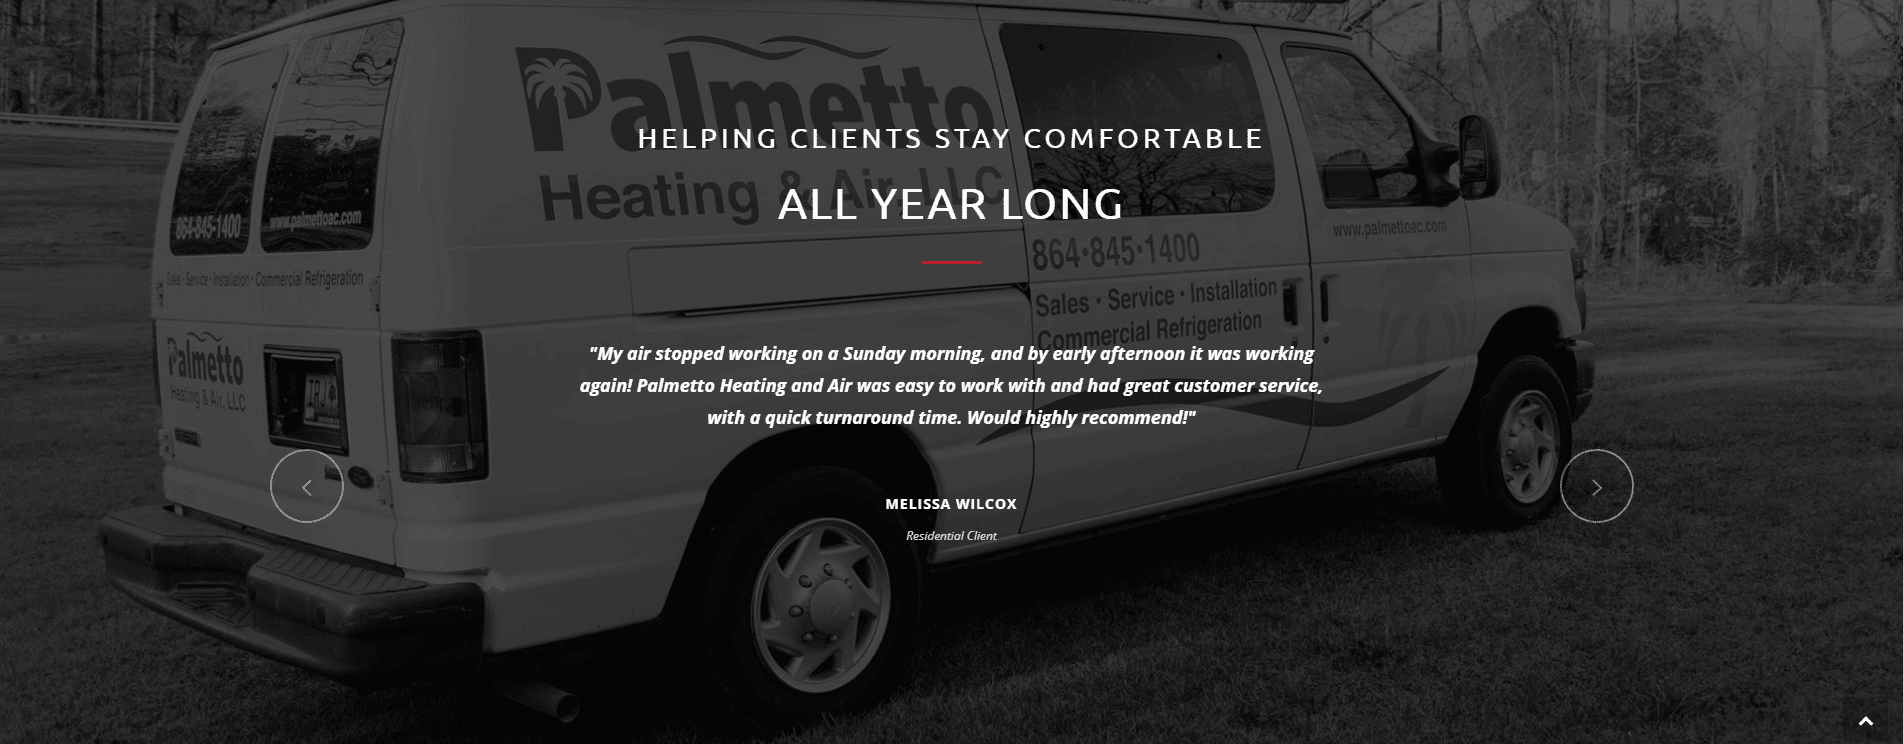 Testimonials from the Palmetto Heating & Air website